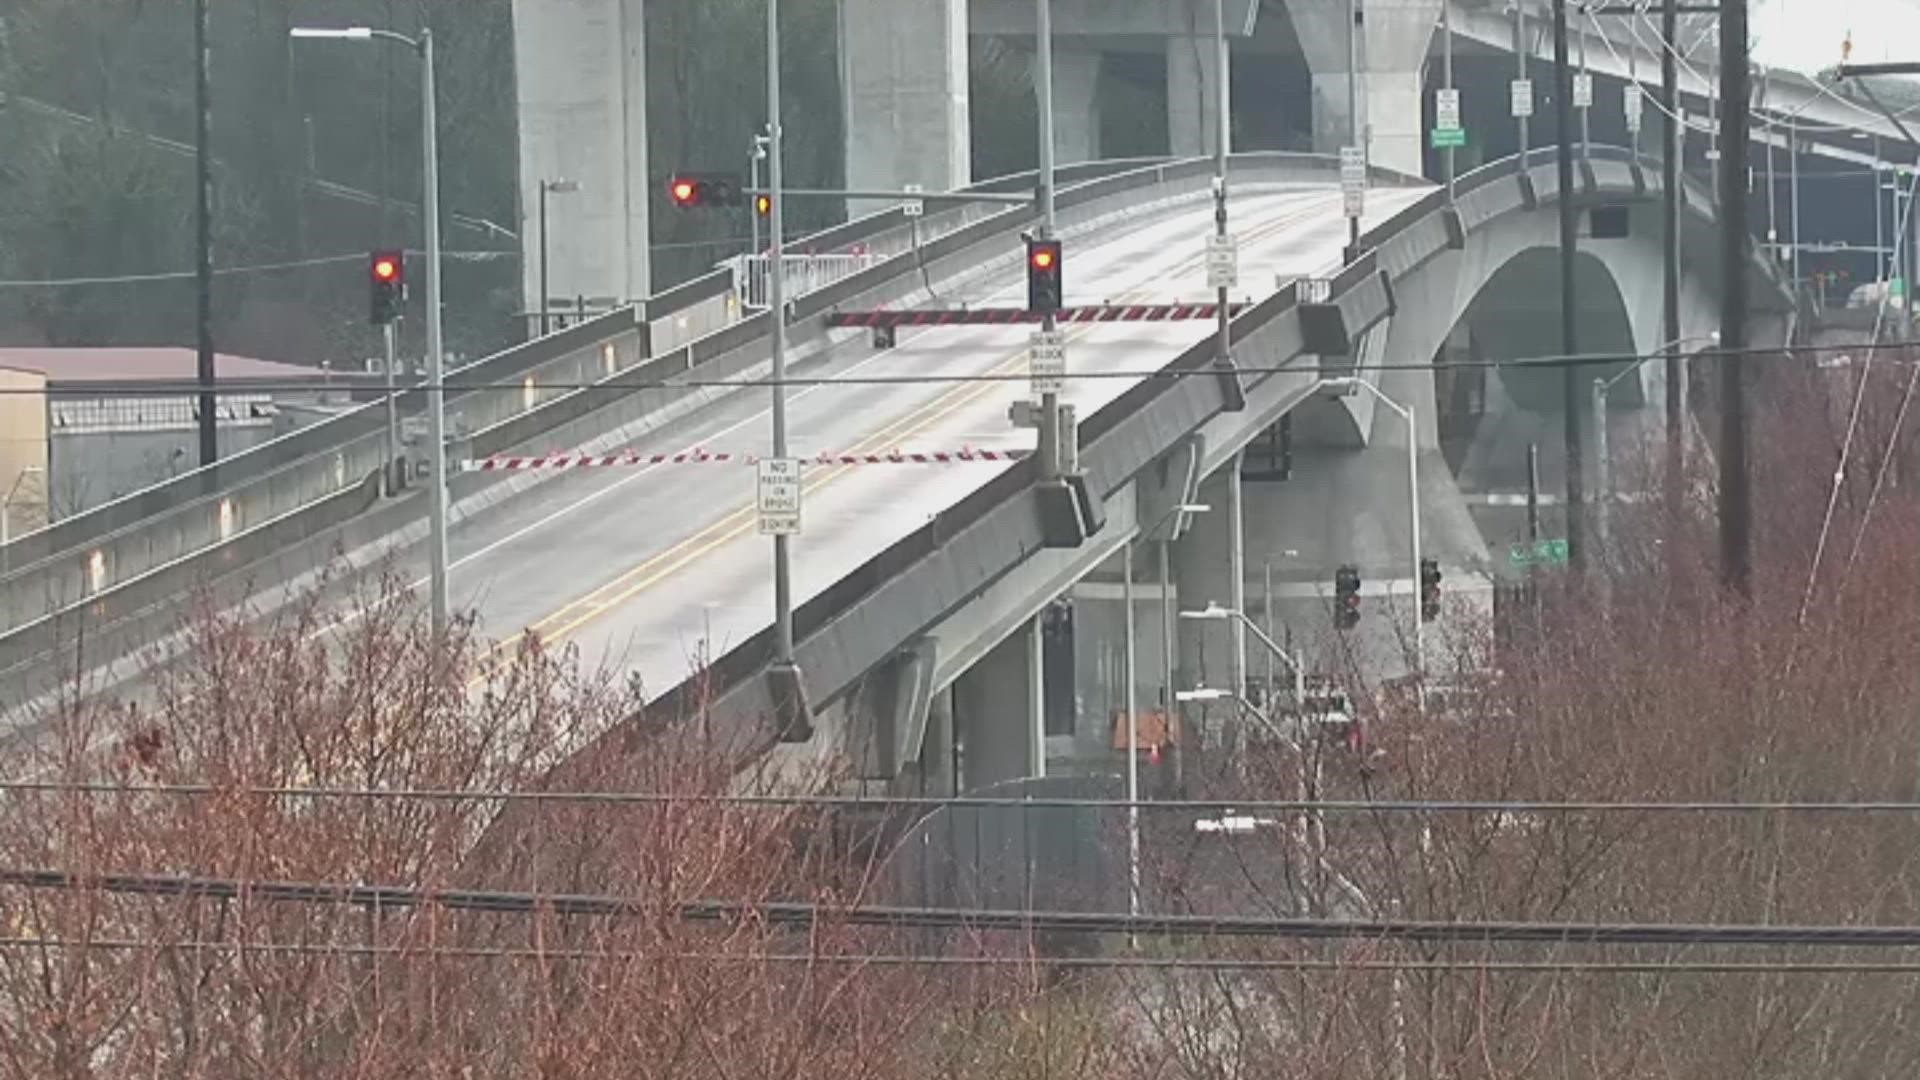 The Spokane Street Swing Bridge is expected to reopen Friday afternoon after being closed for three weeks for repairs.